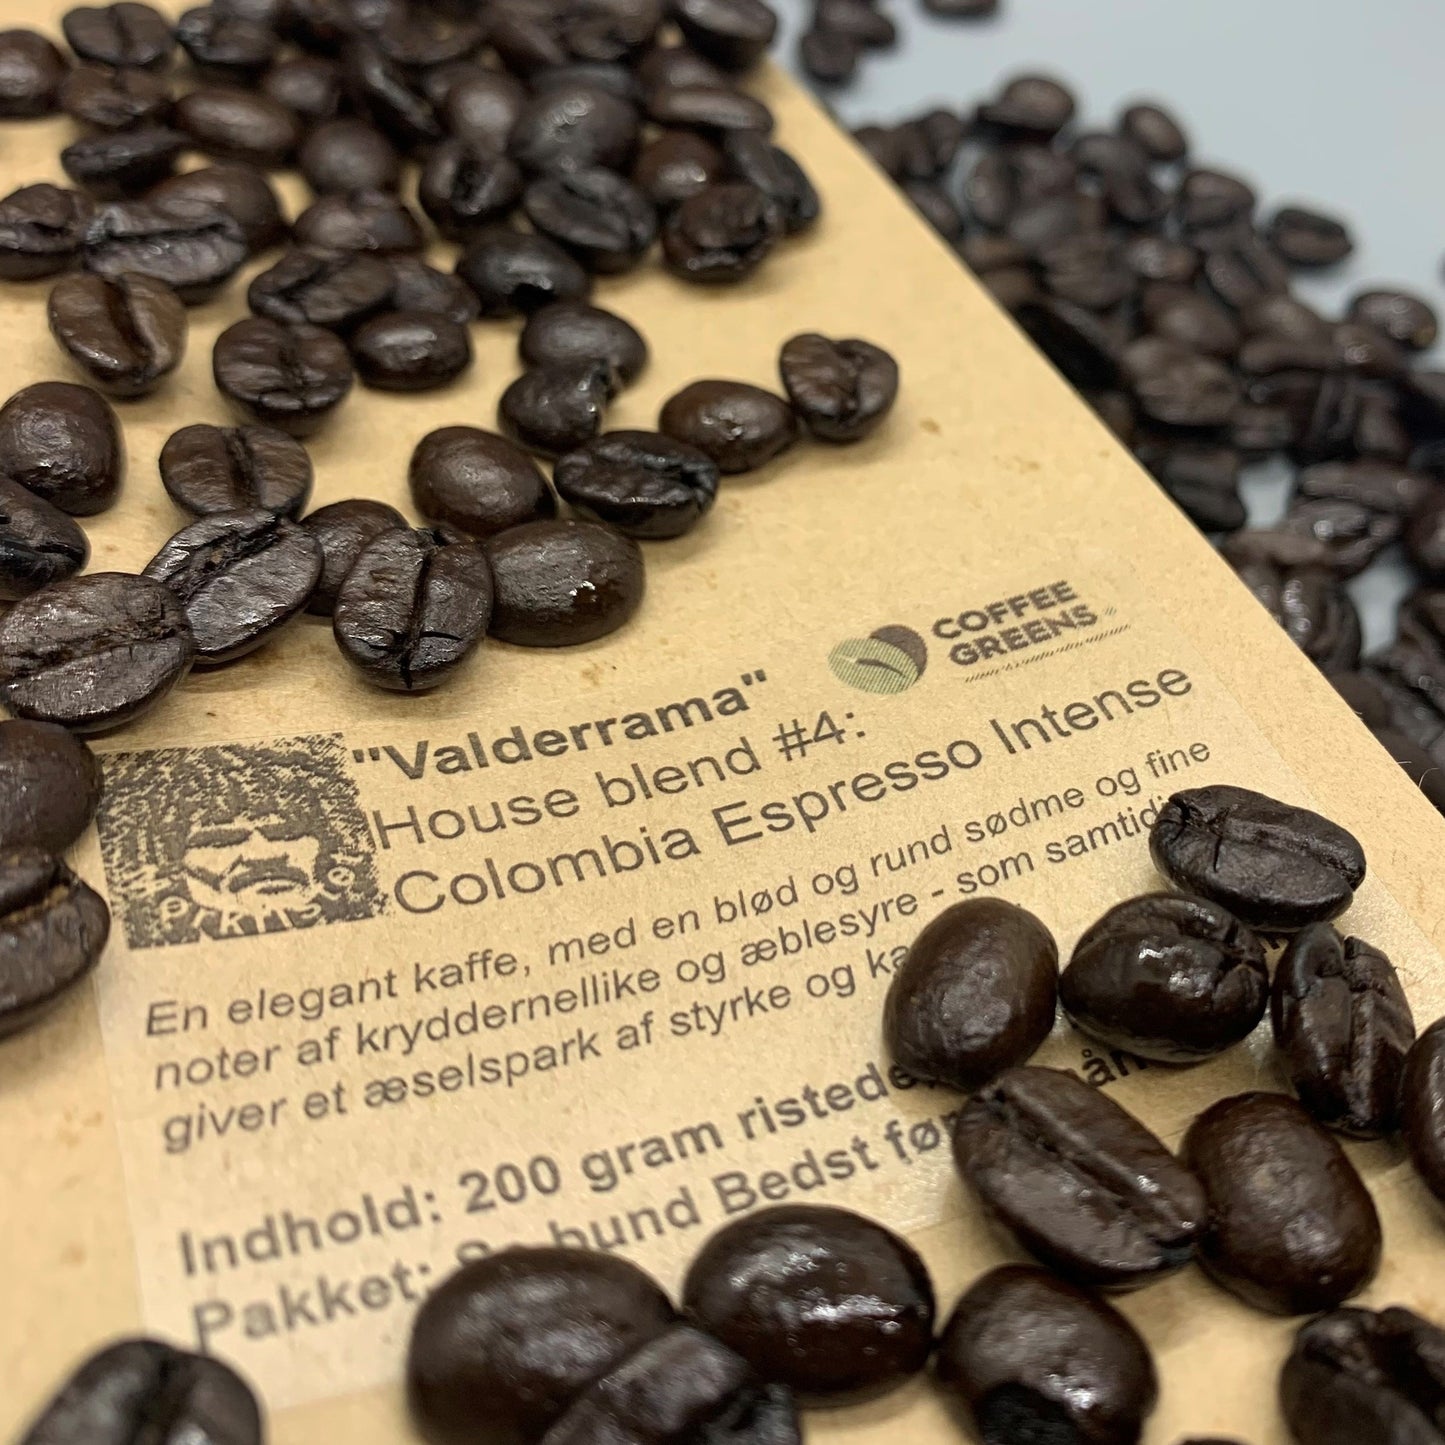 "Valderrama"- House blend # 4:Colombia Espresso Intense - Roasted coffee beans